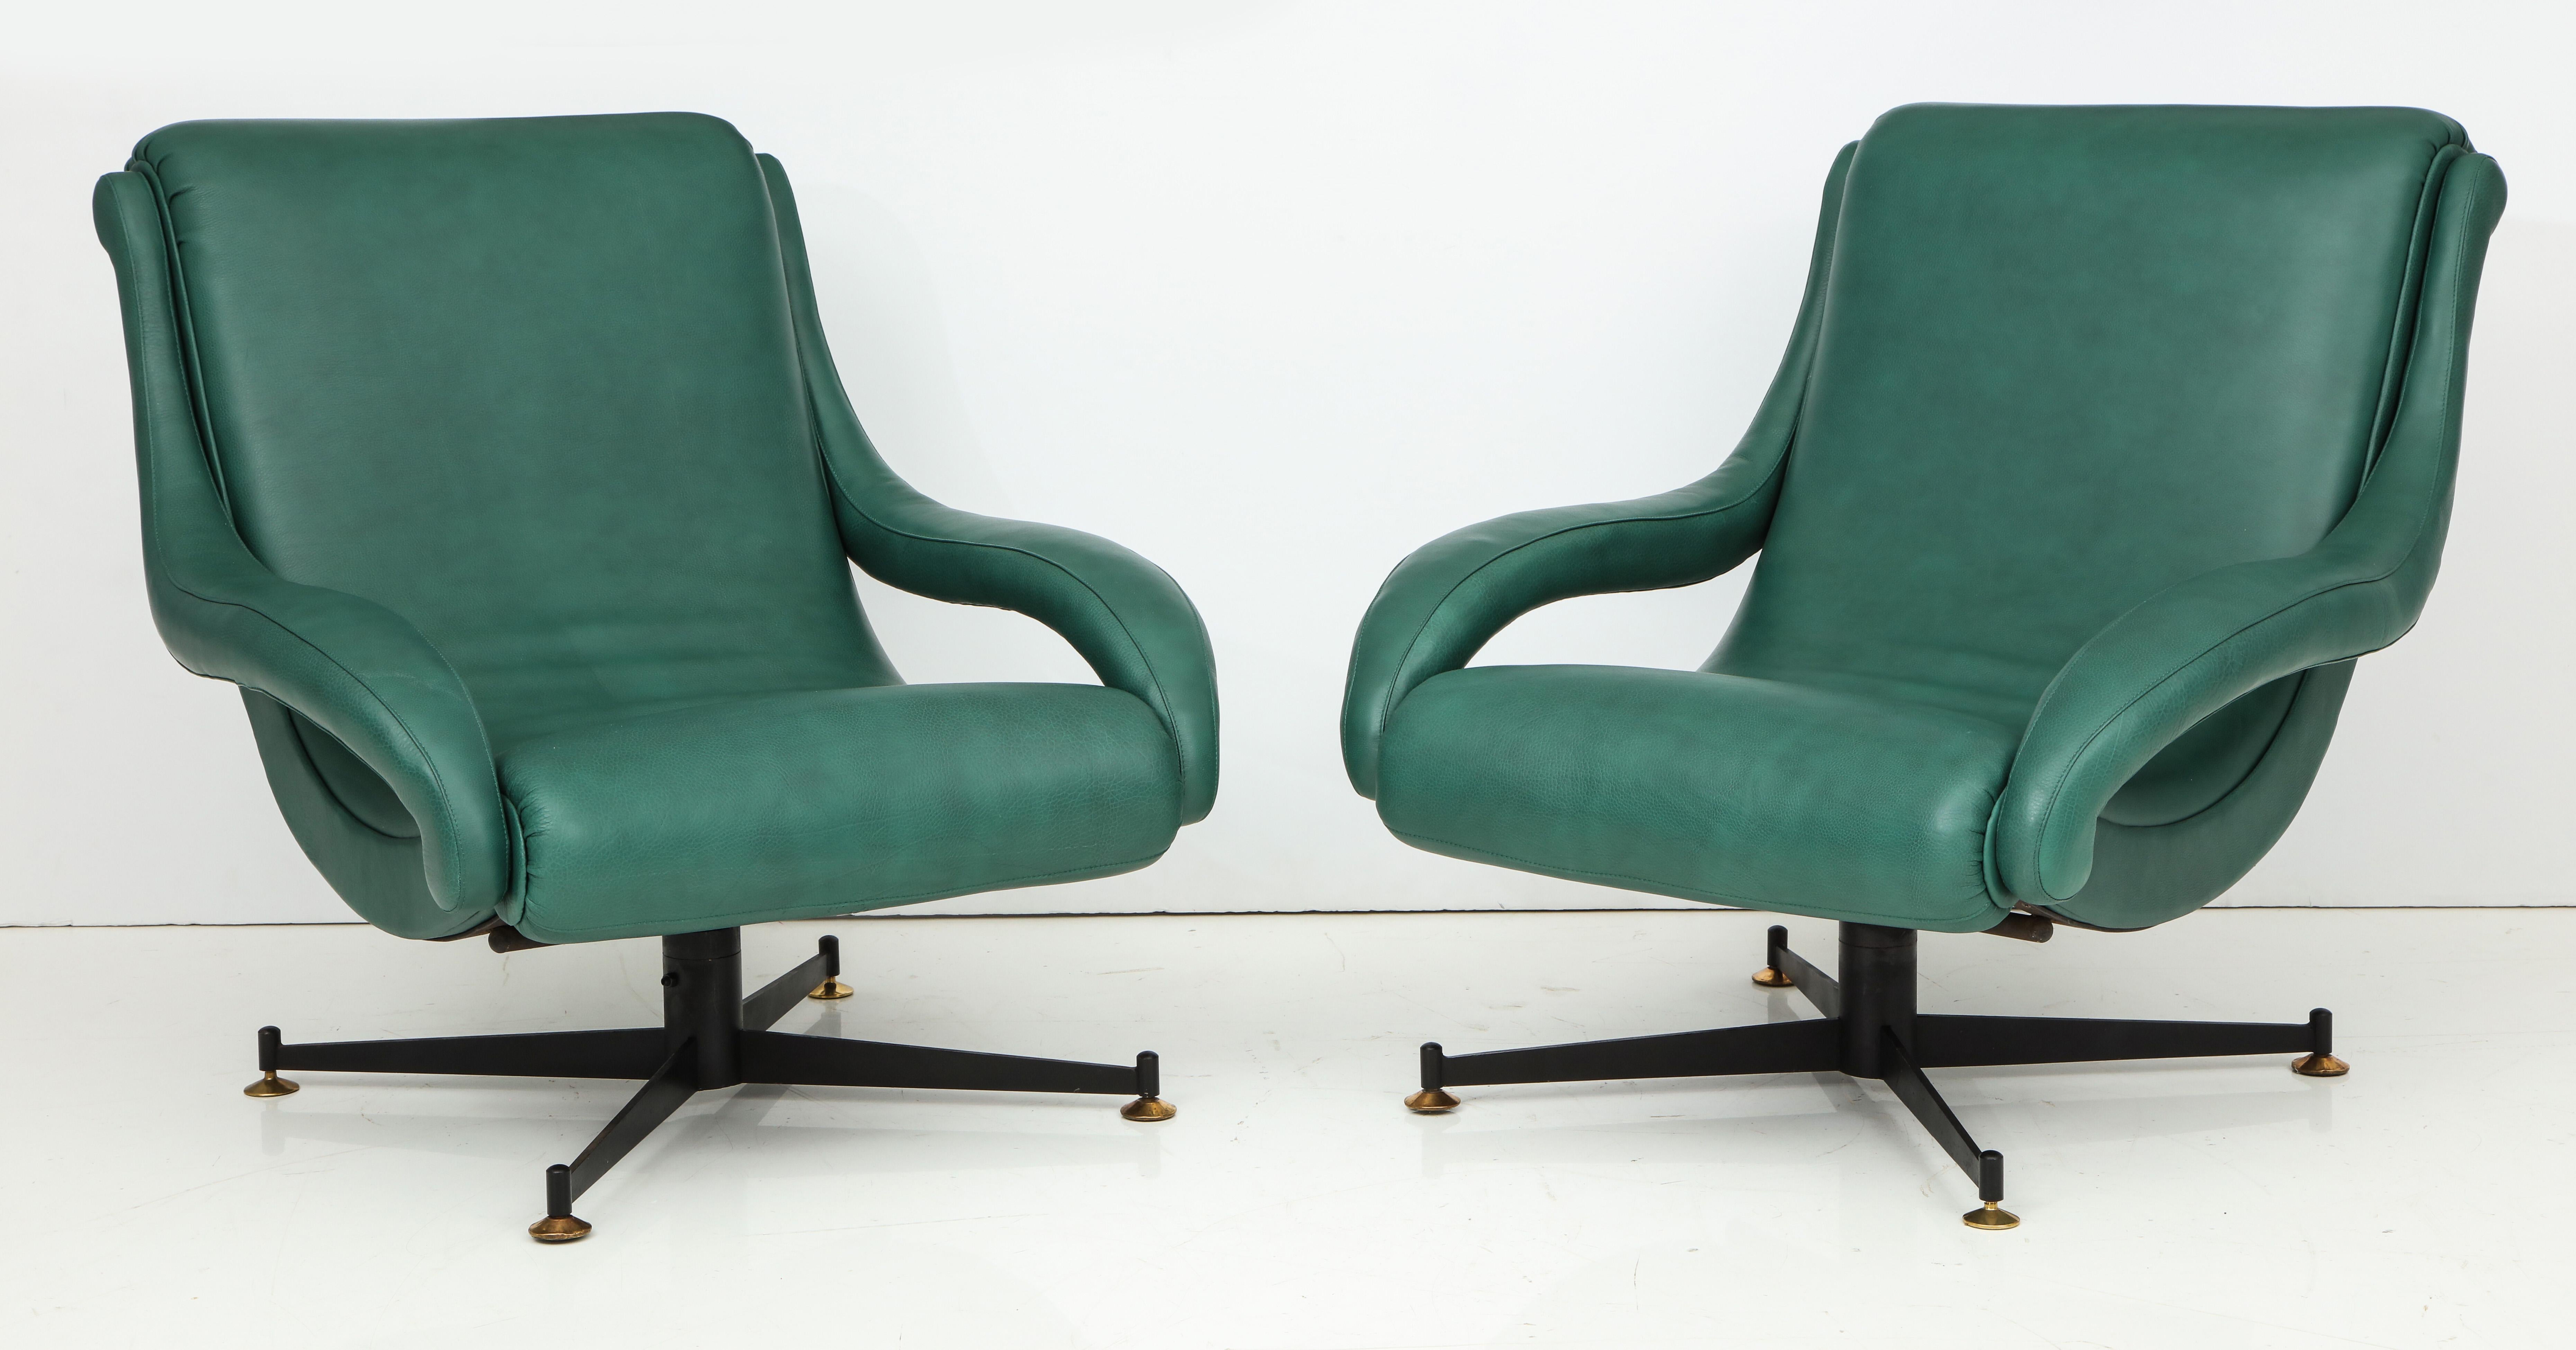 Pair of Lounge Chairs in Gucci Green Leather by Radice for Lenzi, c. 1950, Italy 1